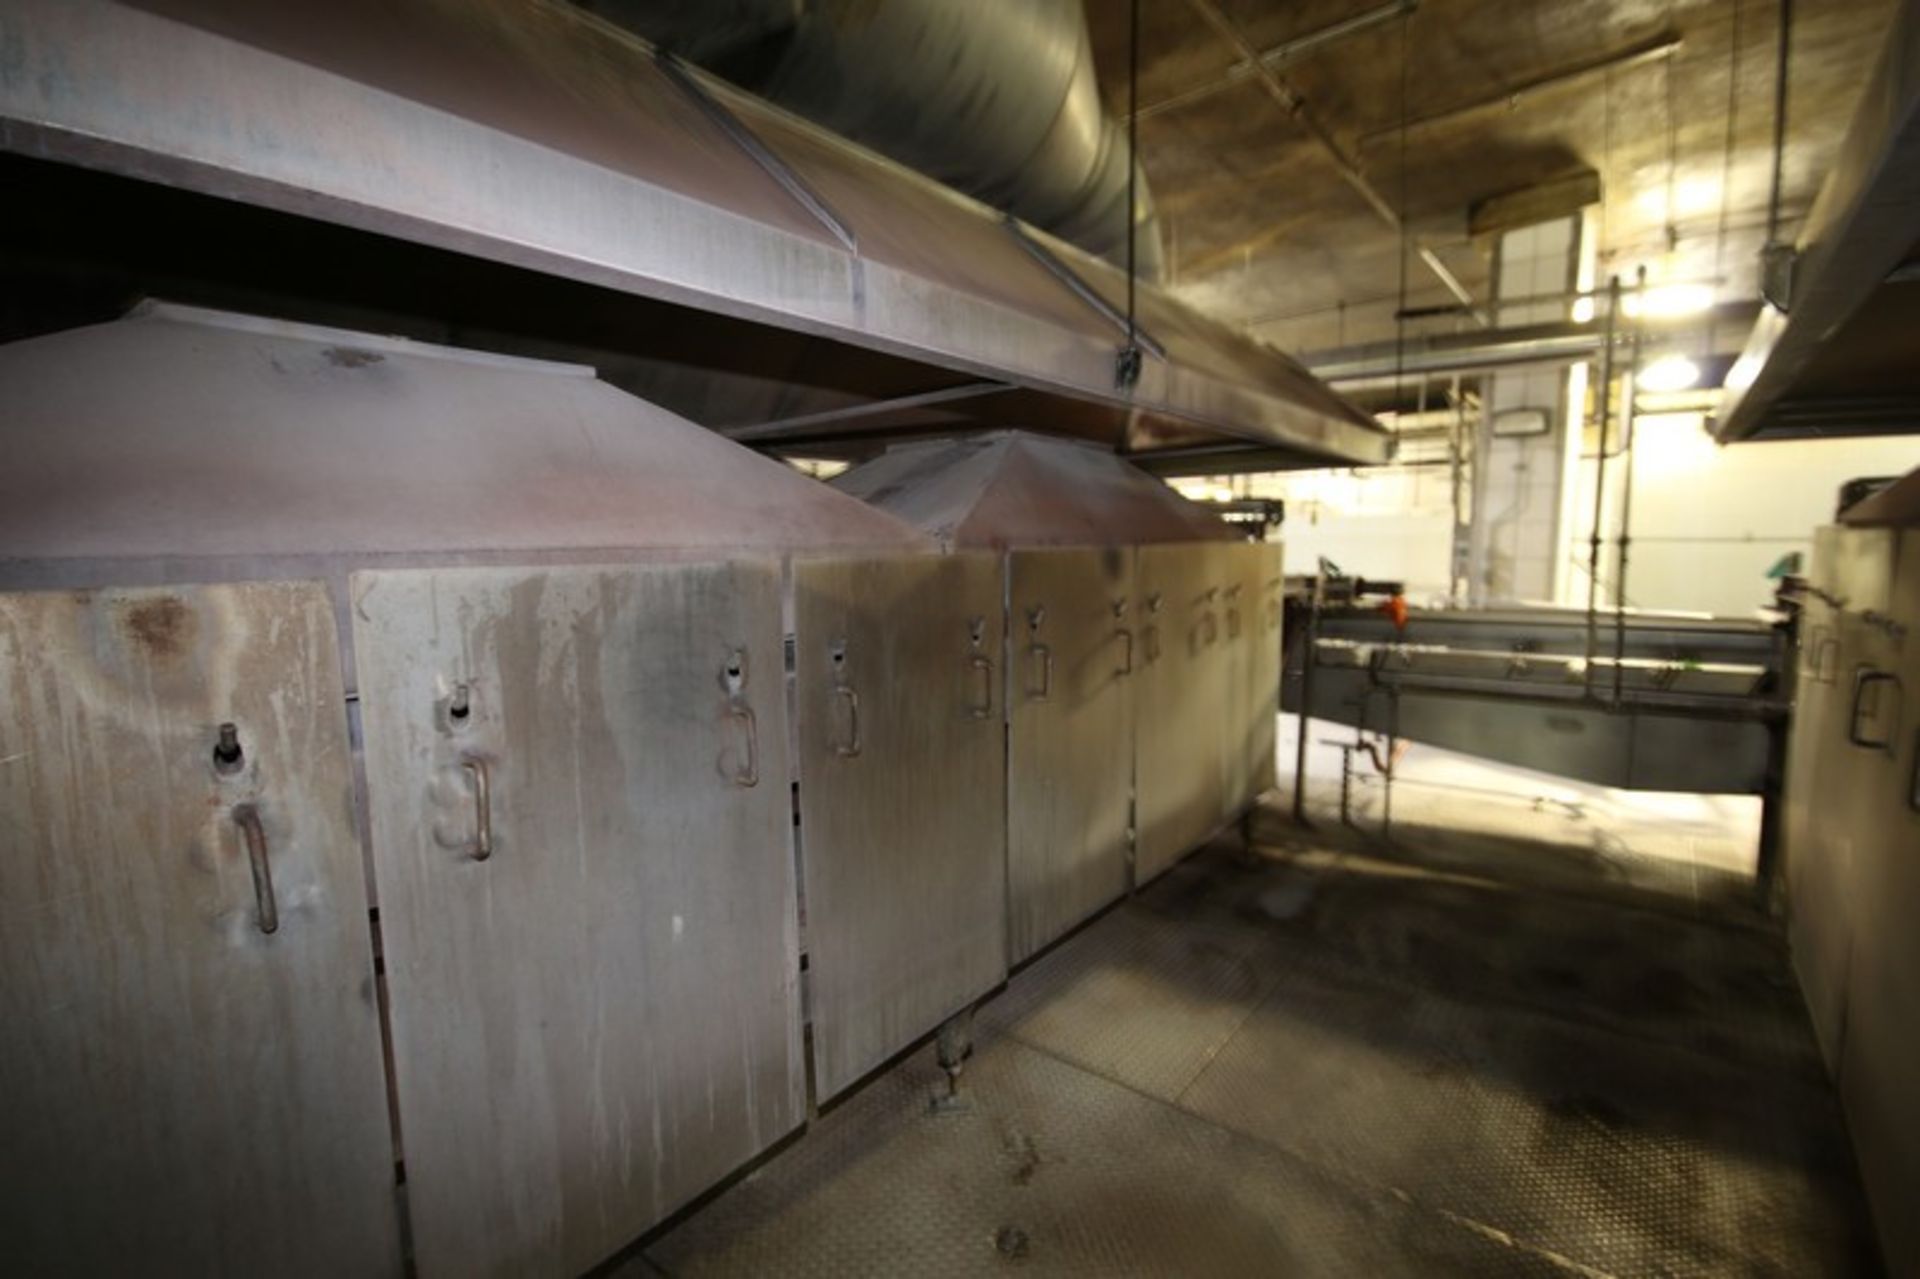 Natural Gas Fire Roaster #1, with Aprox. 33" W Belt, Includes S/S Exhaust Hood, Overall Dims.: - Image 4 of 4